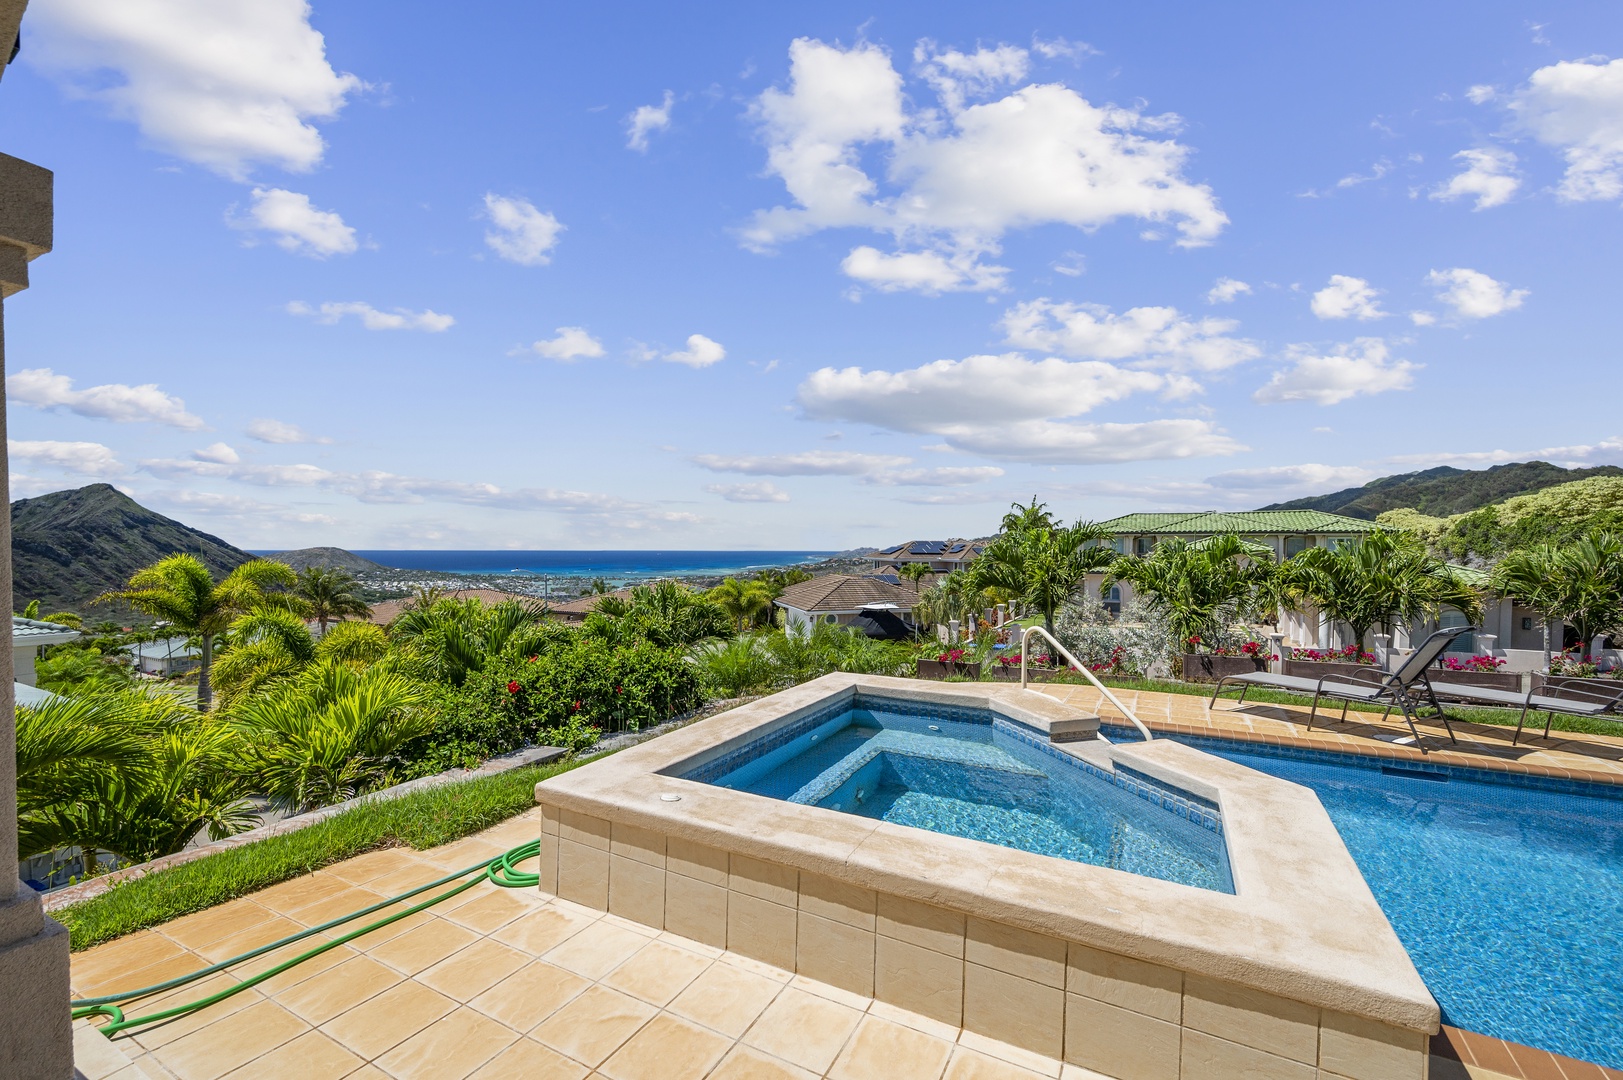 Honolulu Vacation Rentals, Lotus on a Hill* - Sit back, soak up the island sun, and wash your worries away in the private hot tub